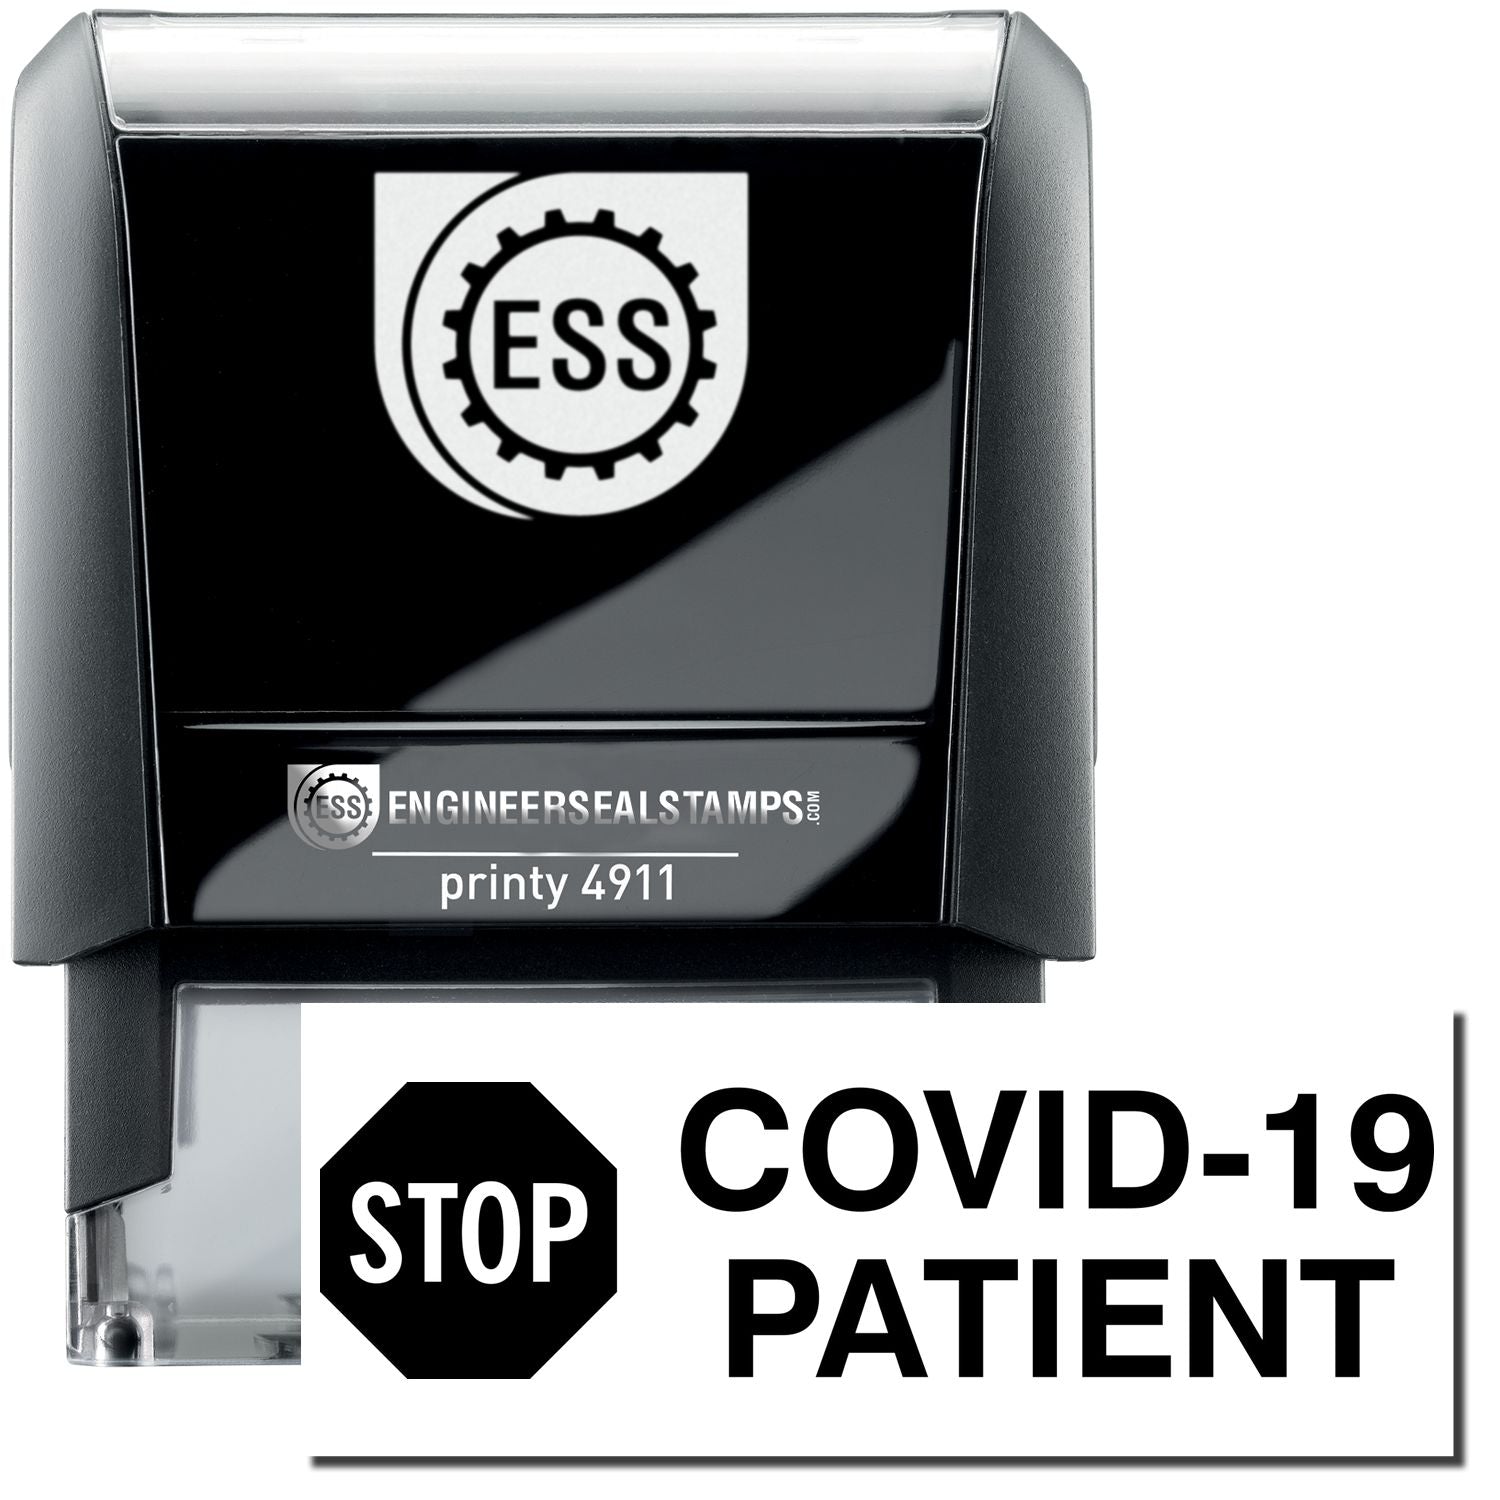 A self-inking stamp with a stamped image showing how the text "COVID-19 PATIENT" with an image of a "STOP" sign on the left is displayed after stamping.